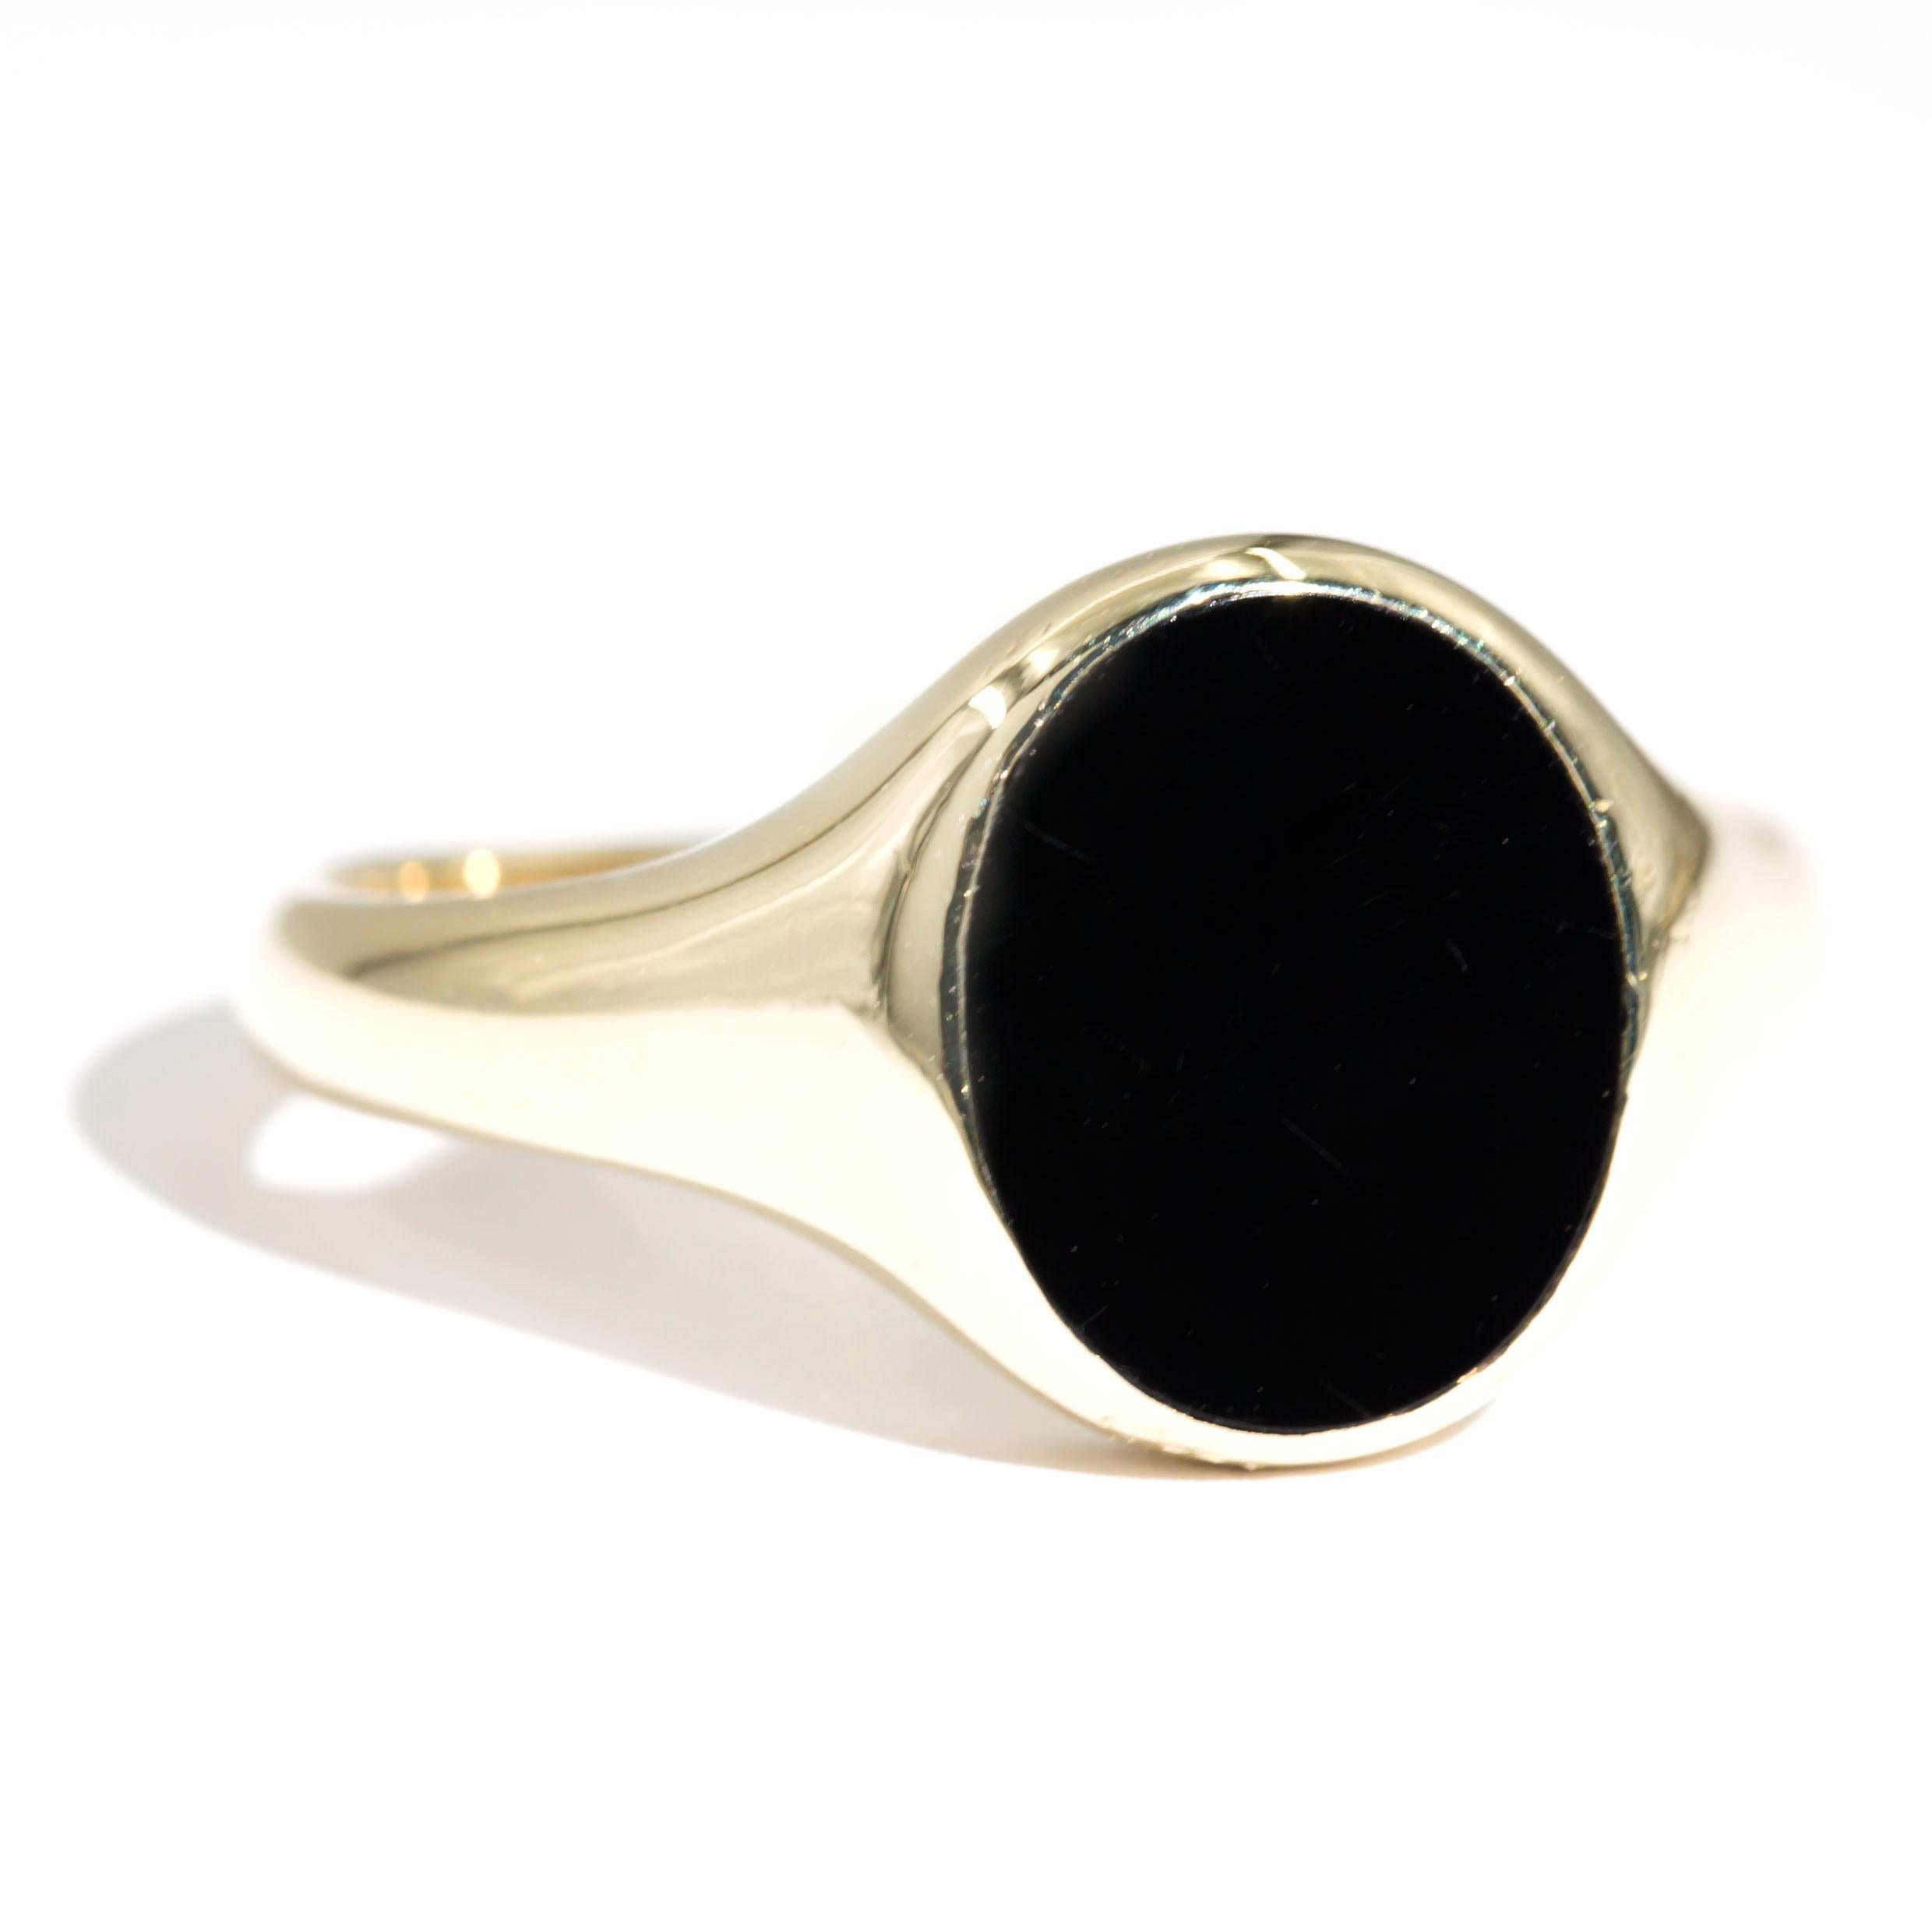 Crafted in 9 carat yellow gold is this handsome vintage mens signet ring featuring a 11.8x9.8 millimetre oval black onyx set in flat oval top. We have named this handsome piece The Roman Ring. The Roman Ring has a high polished band and is perfectly